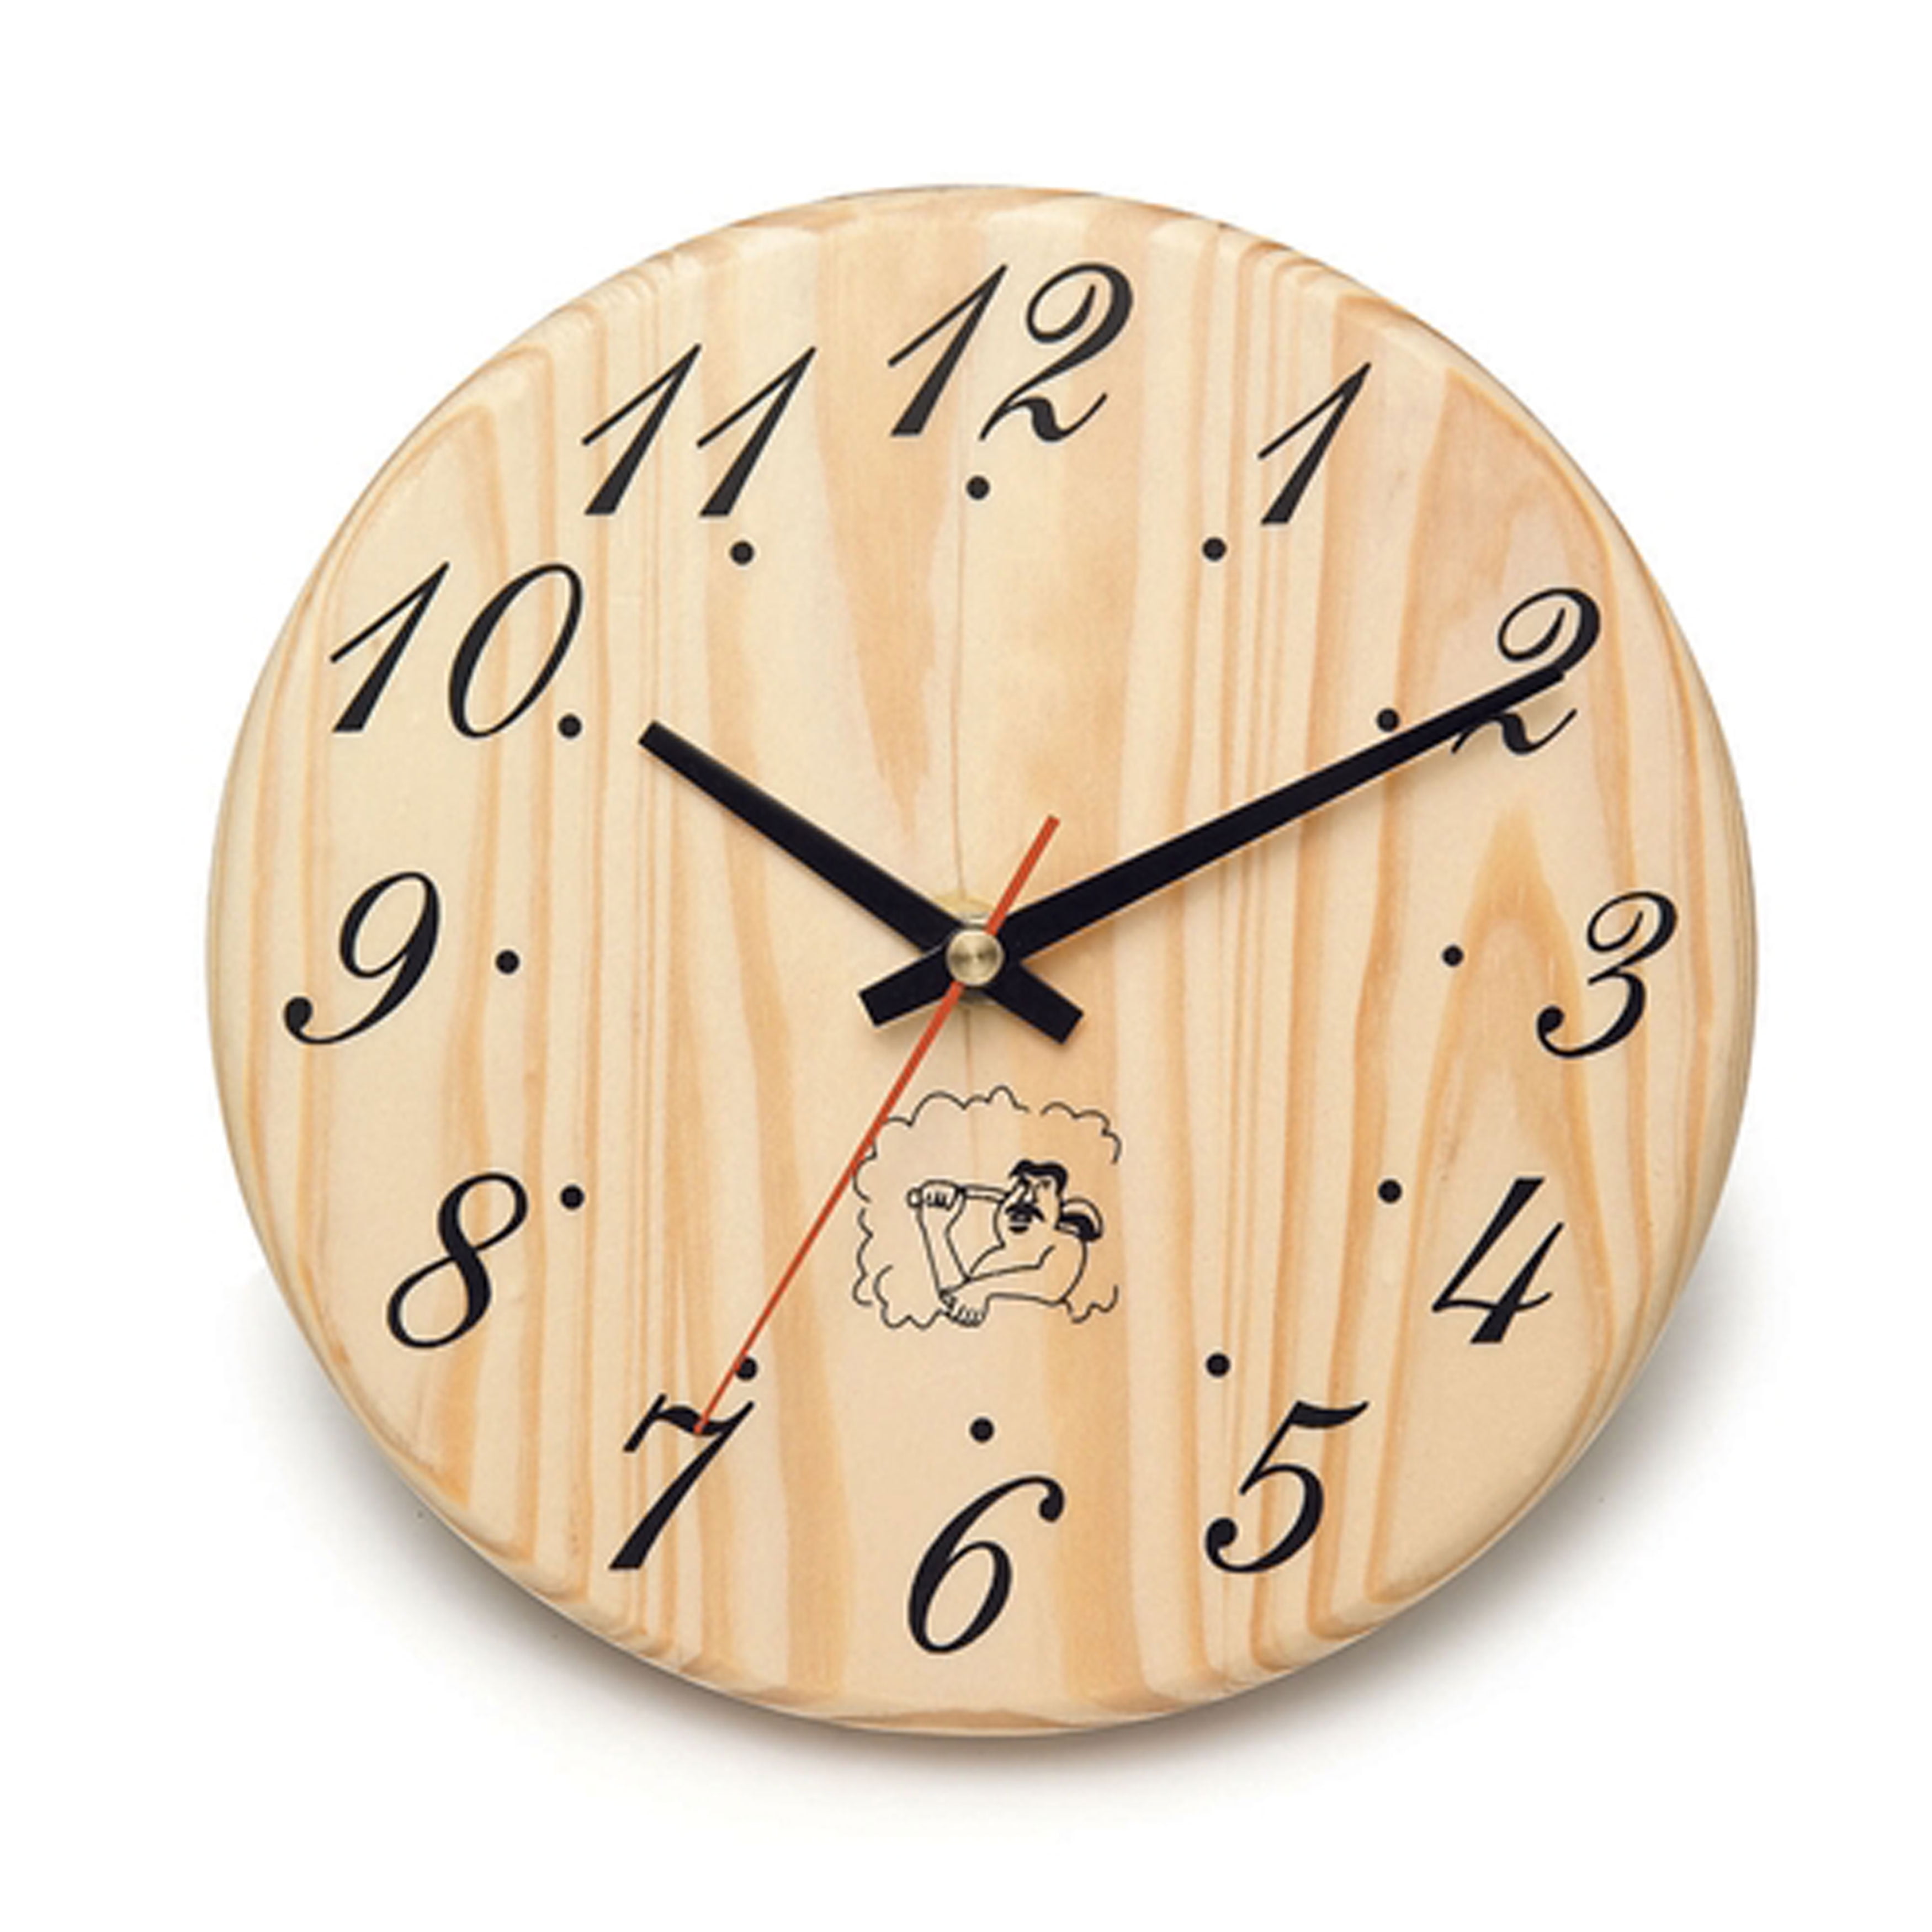 Picture of Aleko WJ12-UNB 8 x 8 x 4 in. Sauna Accessory Handcrafted Analog Clock in Pine Wood